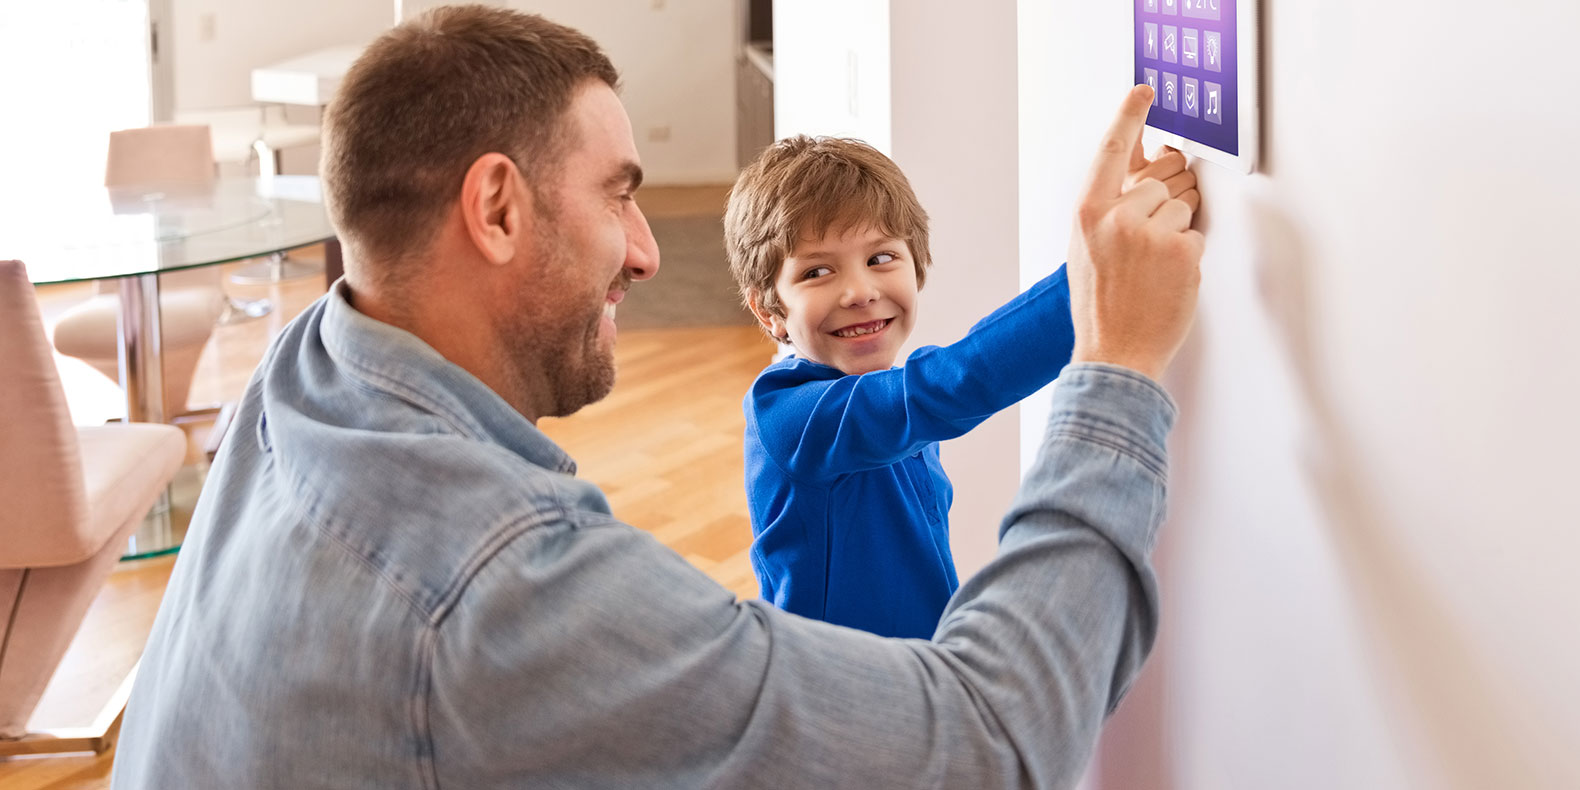 3 Home Security Tips to Teach Your Children